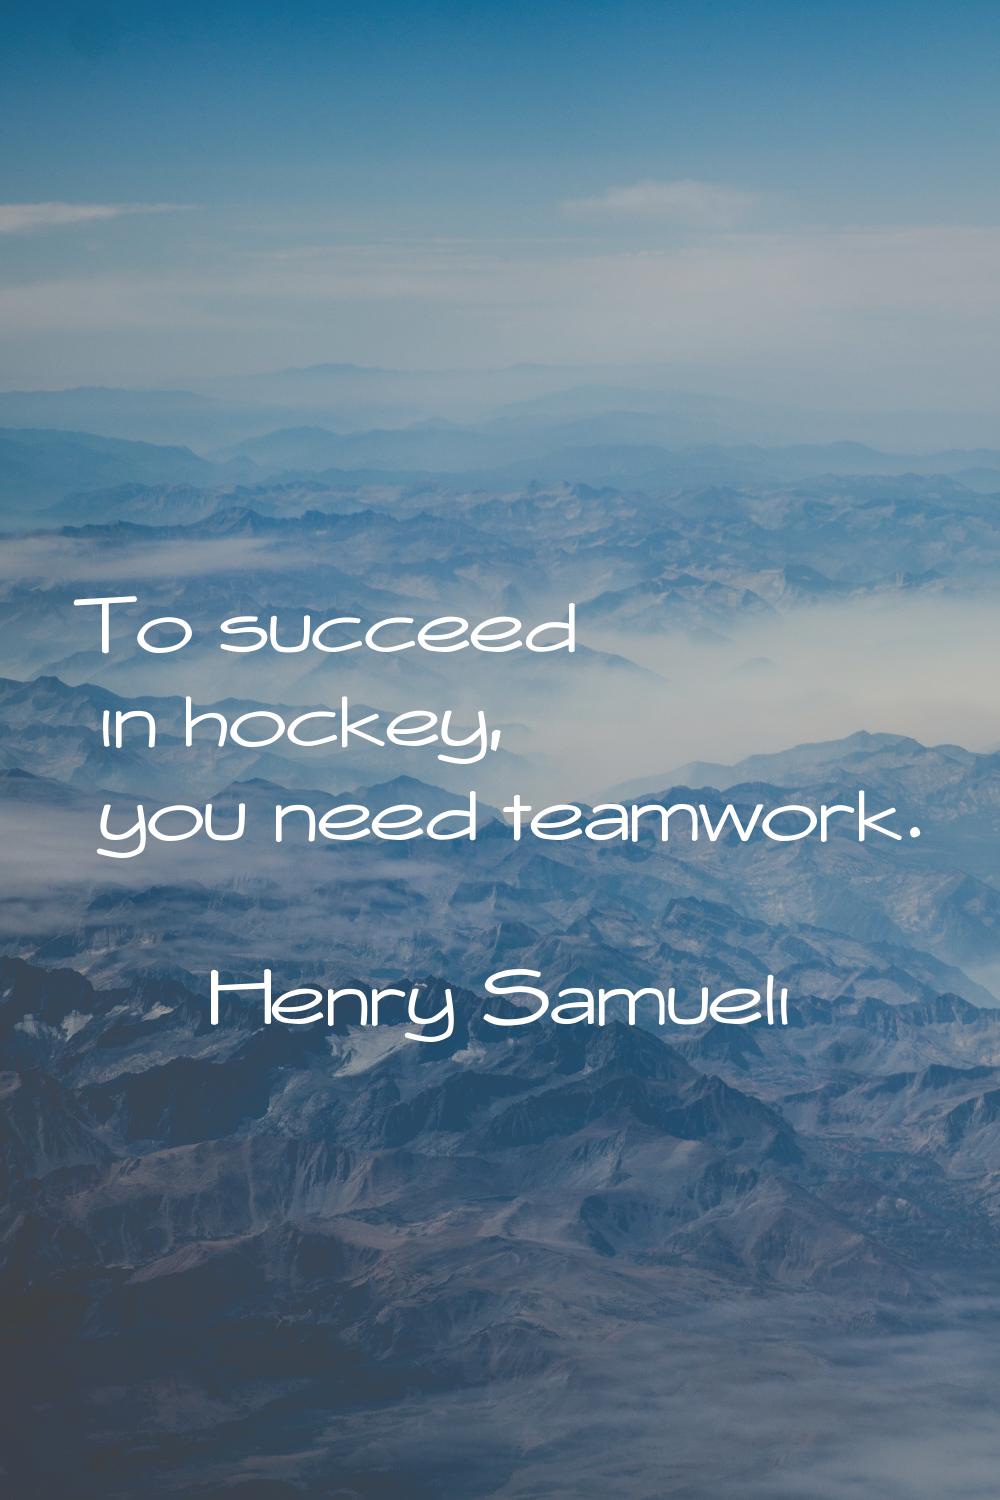 To succeed in hockey, you need teamwork.